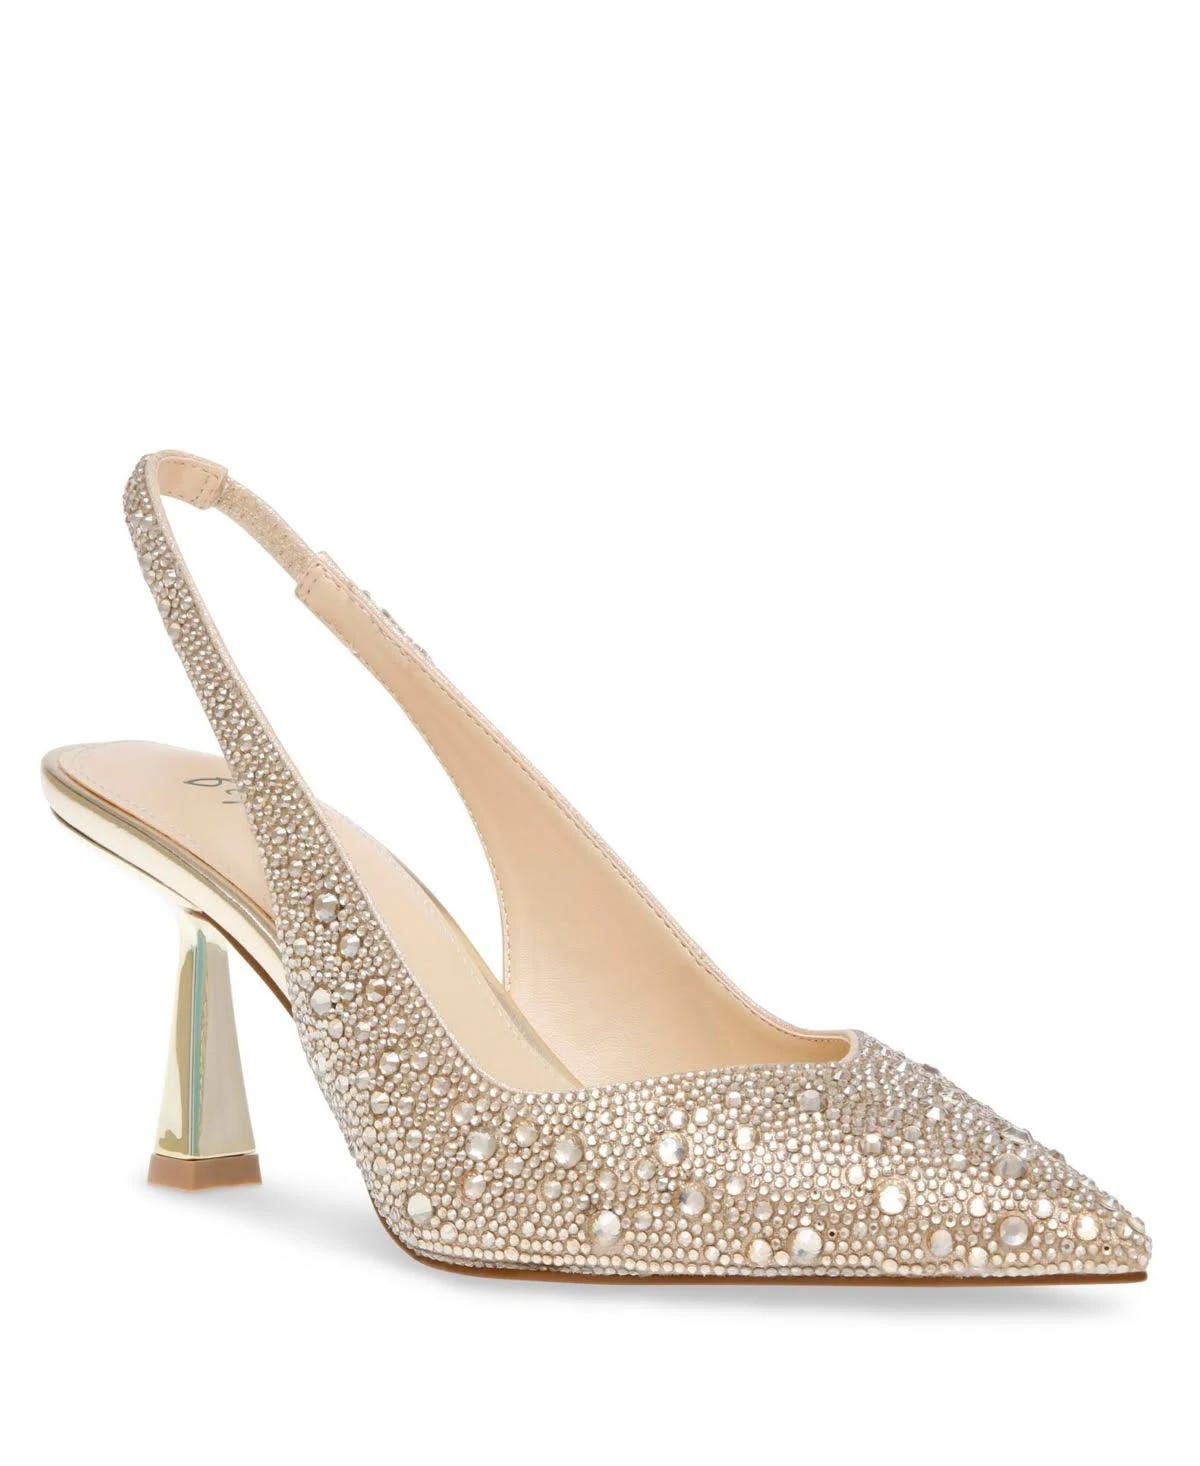 Stunning Light Gold Pumps with Pointed Toe and Slingback Straps | Image